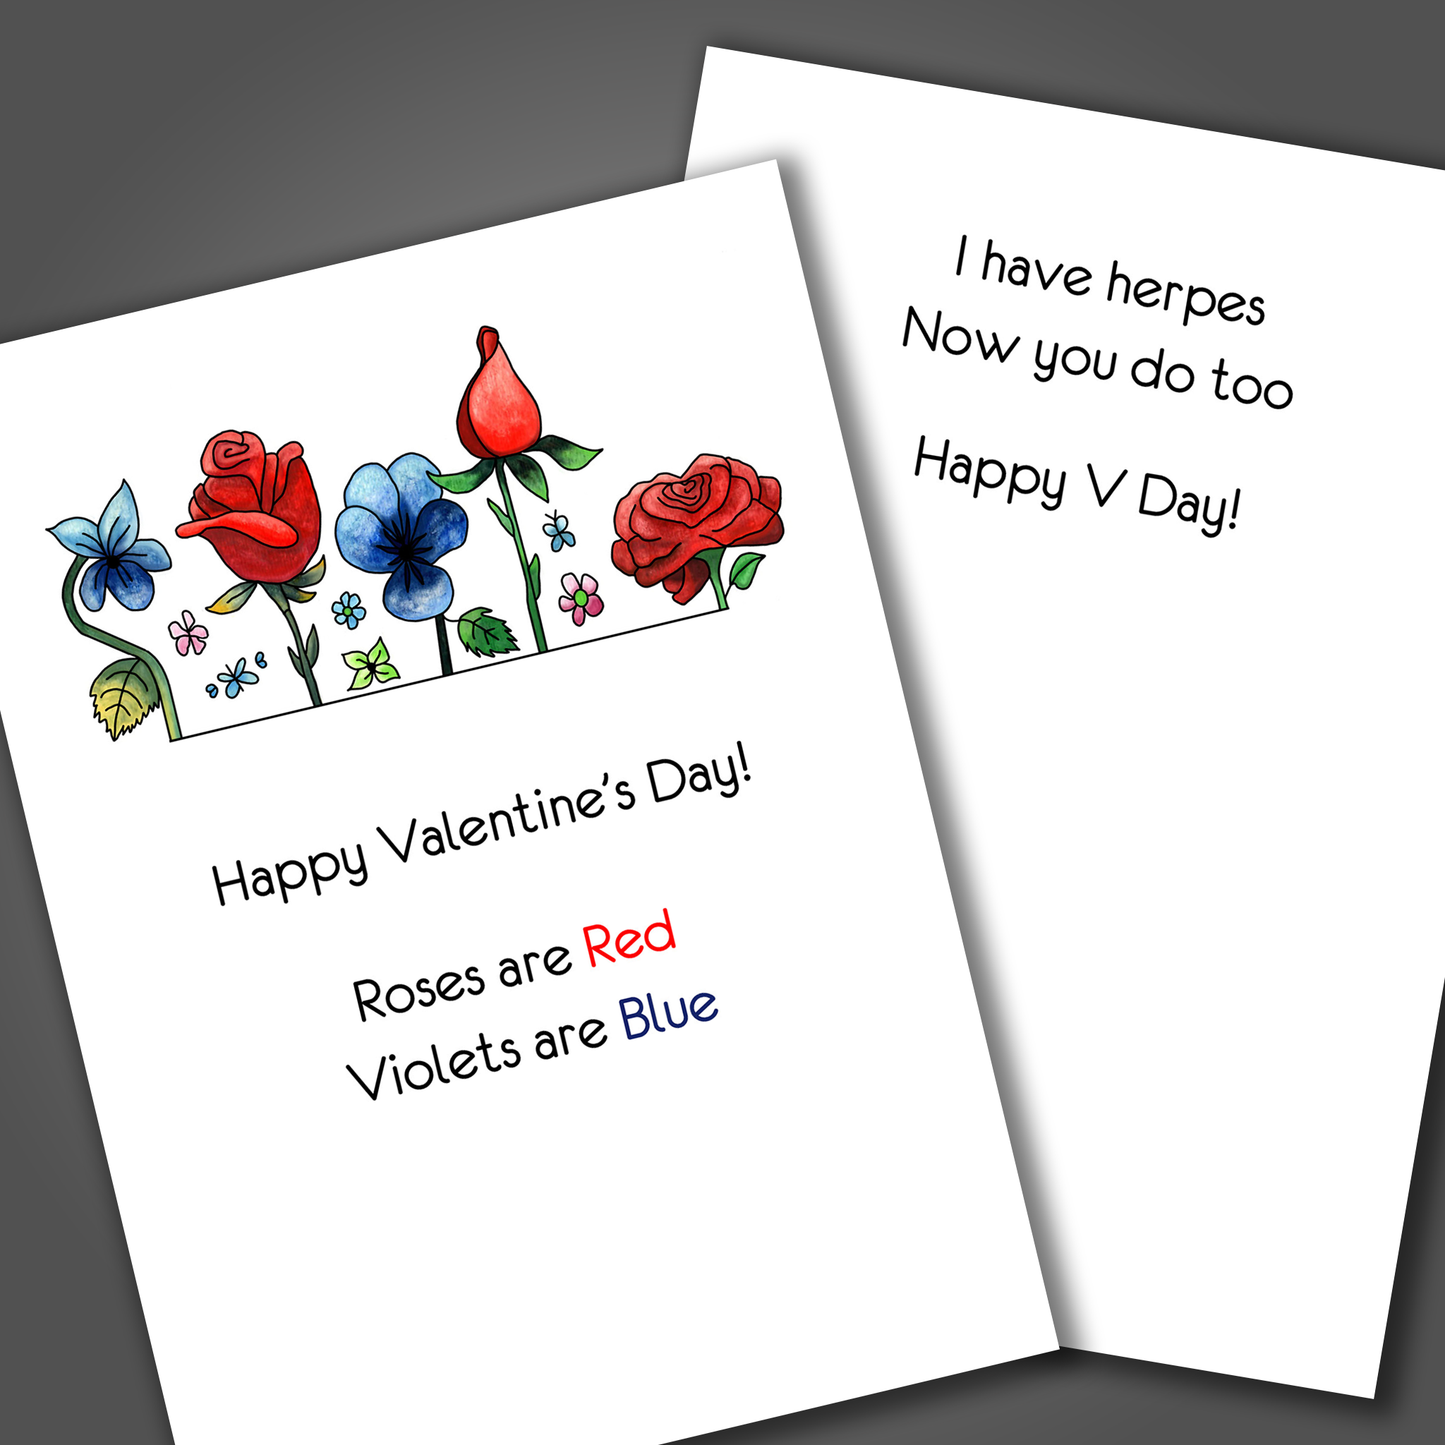 Happy Valentine's day card with red and blue flowers drawn on front of the card. Inside the card is a funny joke that says I have herpes, happy V Day!